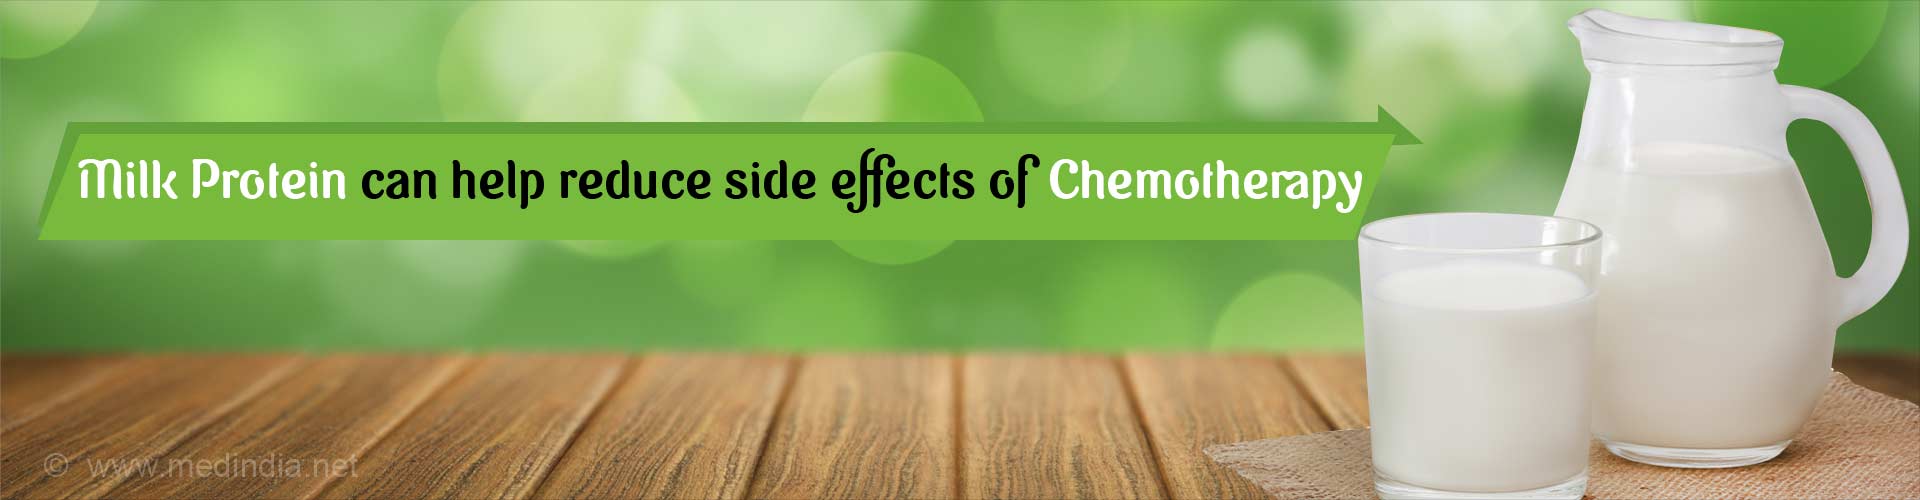 Milk protein can help reduce side effects of chemotherapy.